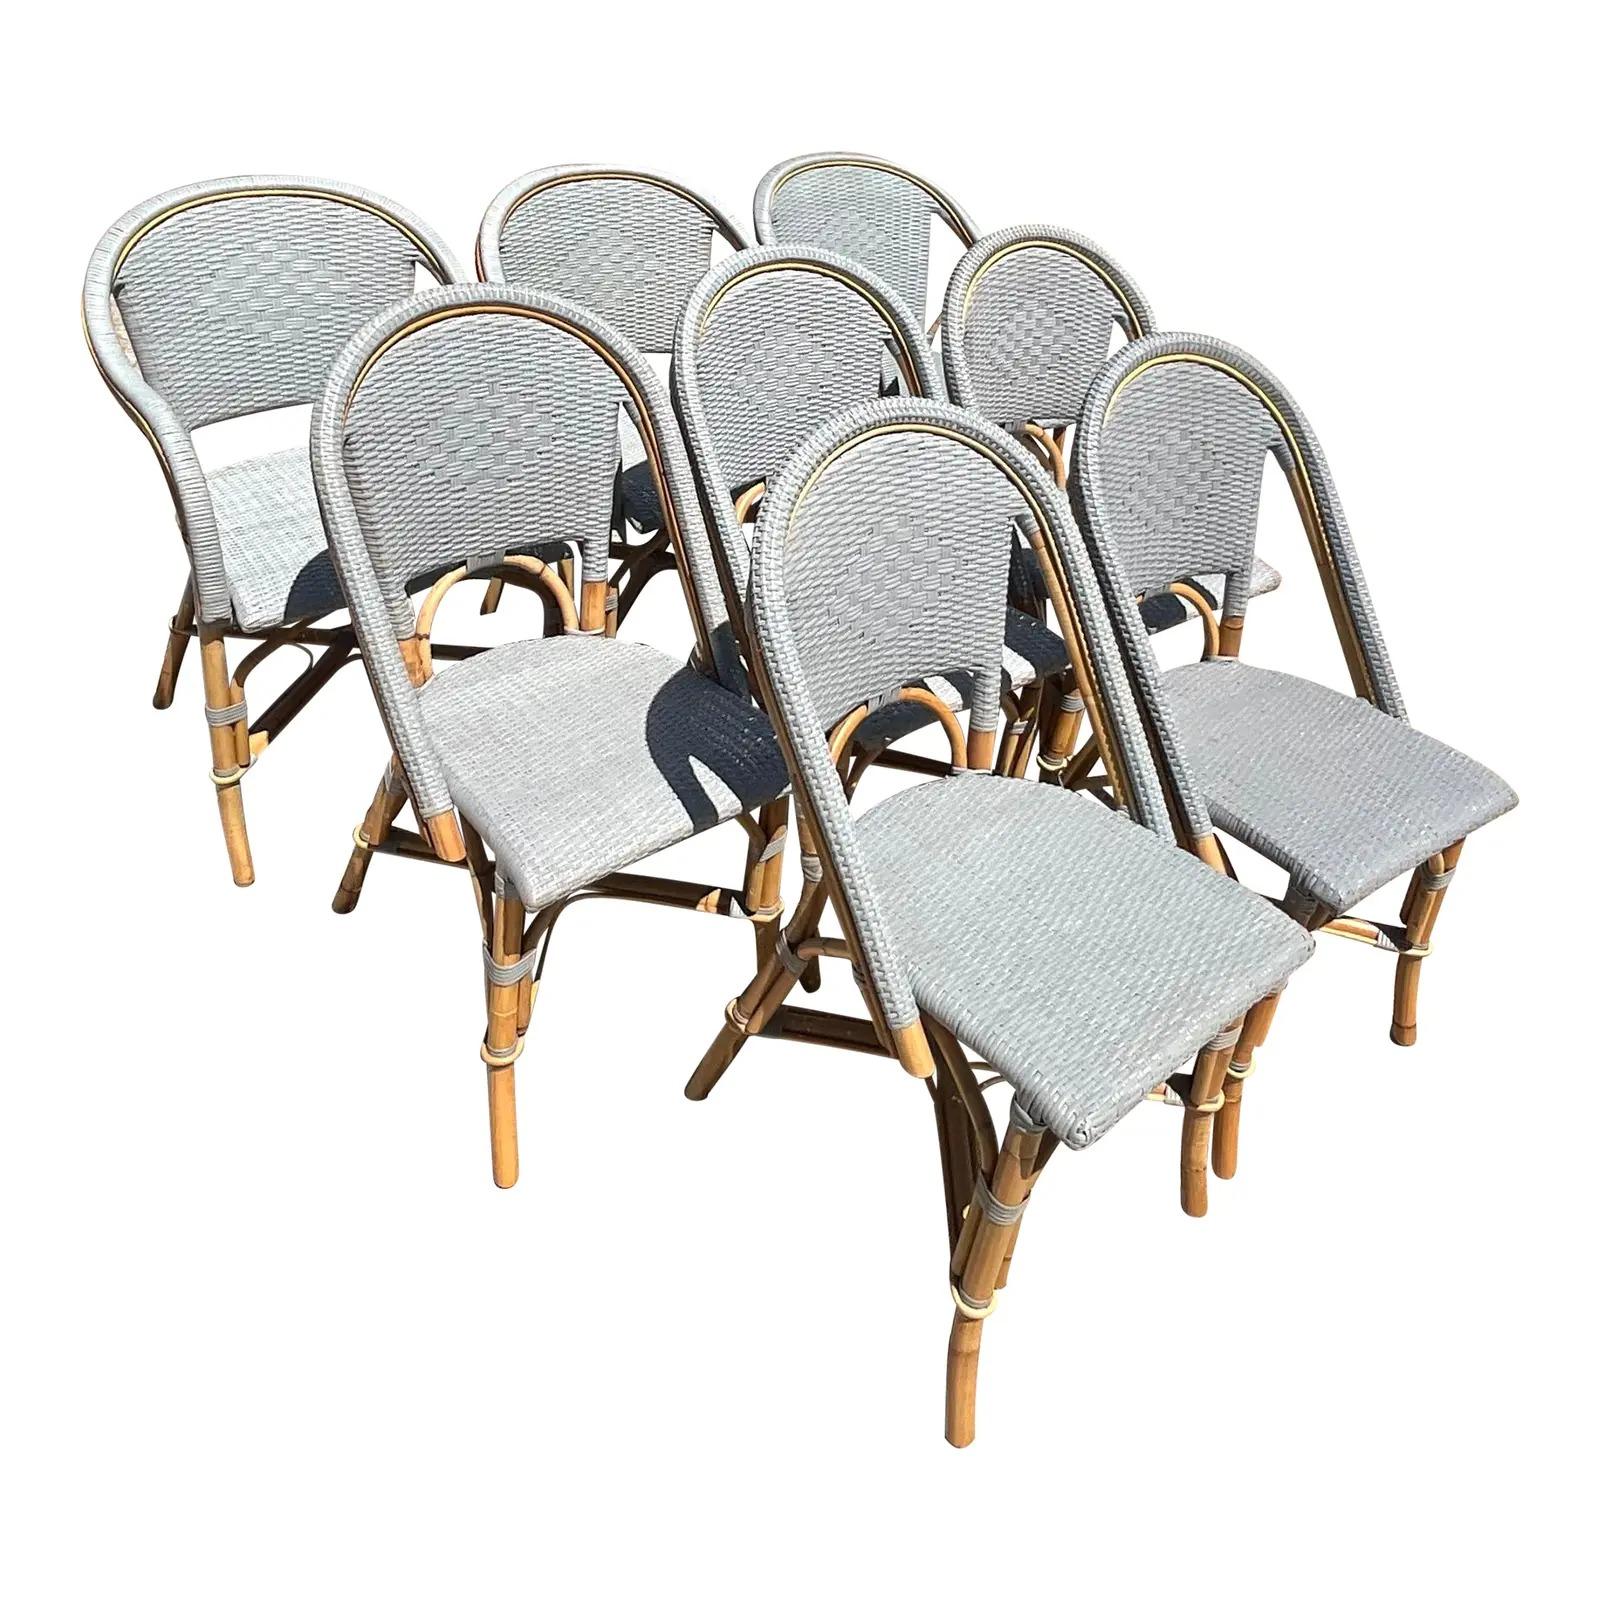 Fantastic vintage coastal set of 8 serena and lily dining chairs. The coveted Riviera woven rattan in sky blue. 3 Arm chairs and 5 side chairs. Acquired from a Palm Beach estate.